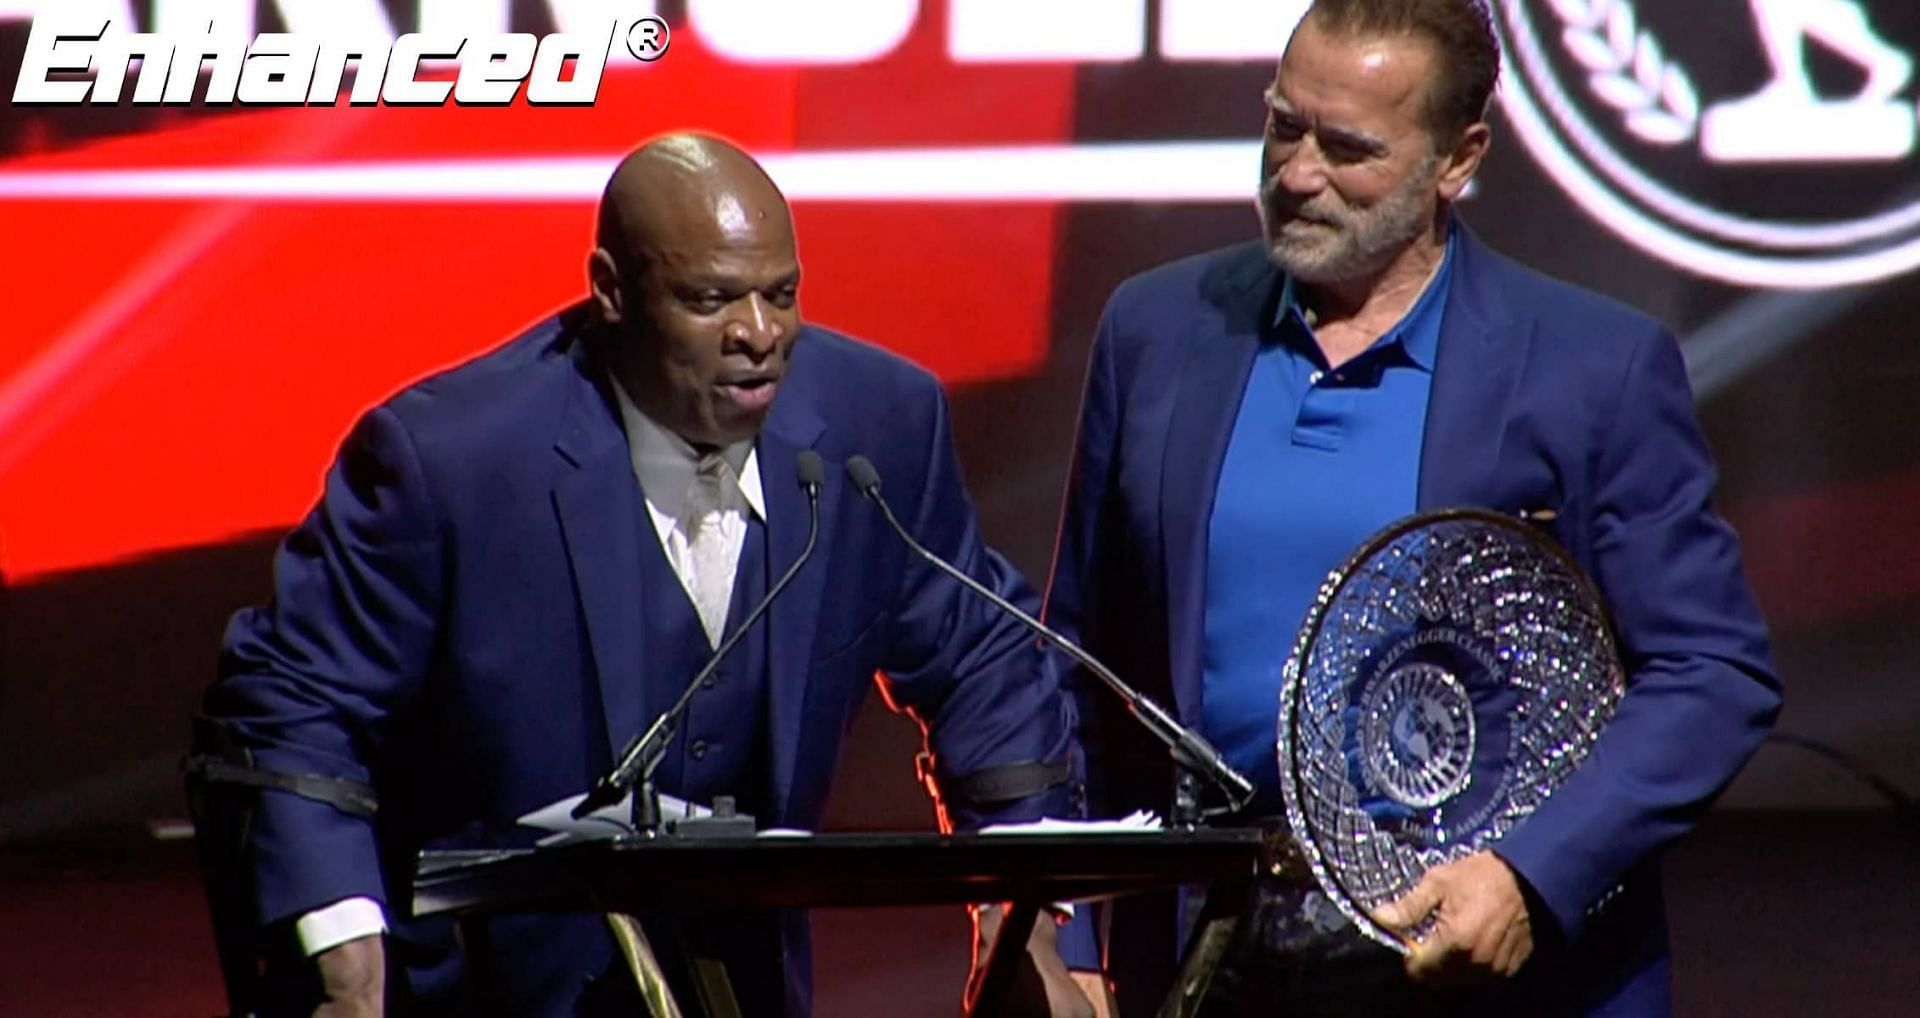 Ronnie Coleman during his speech at the 2021 Arnold Classic (Image via Generation Iron)